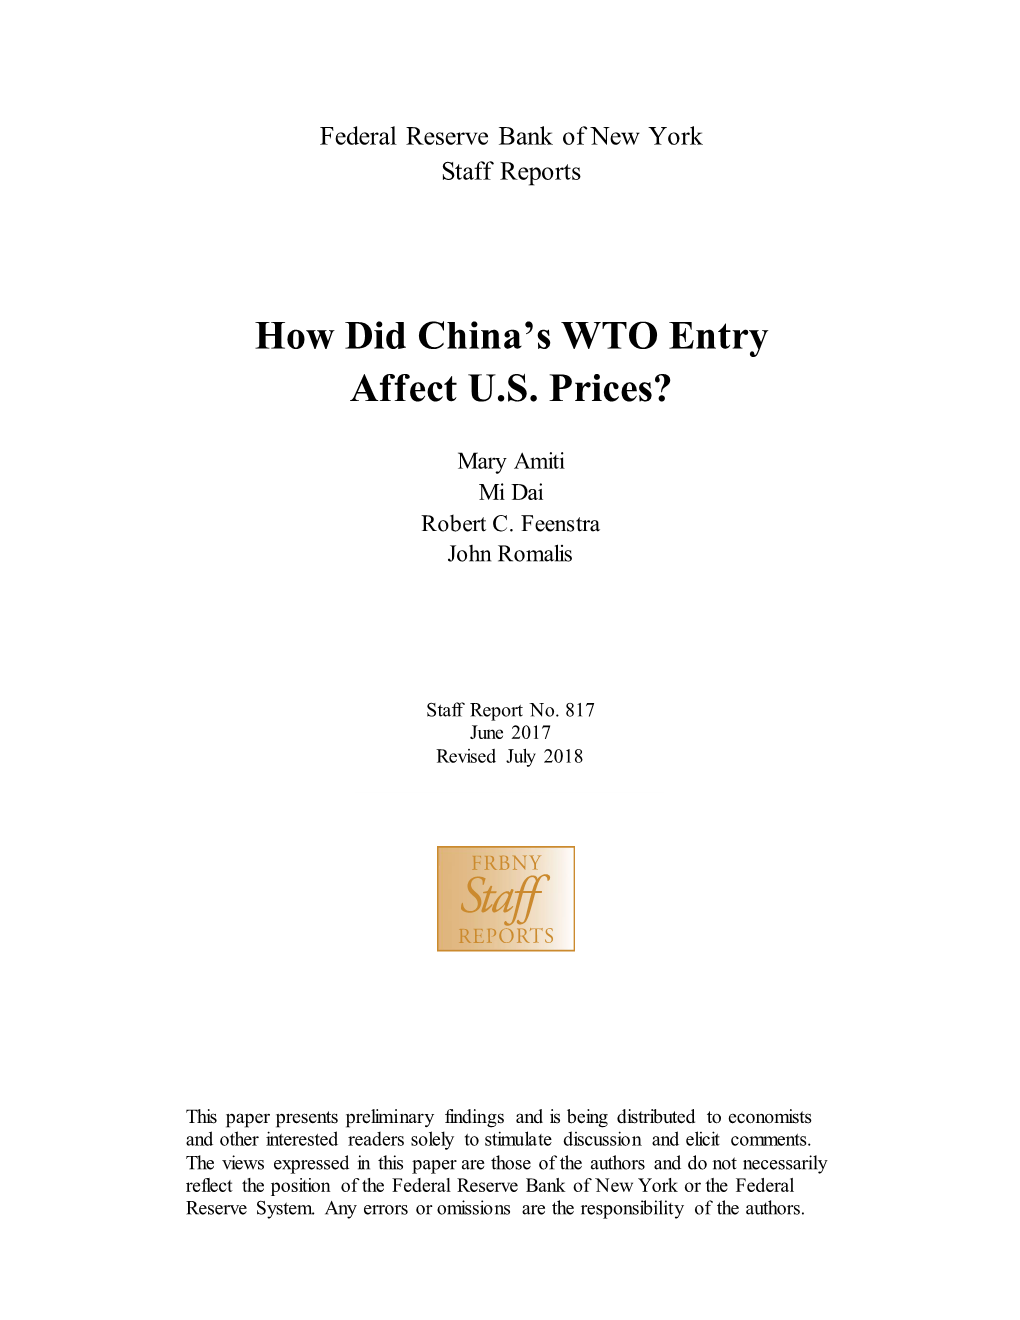 How Did China's WTO Entry Affect U.S. Prices?